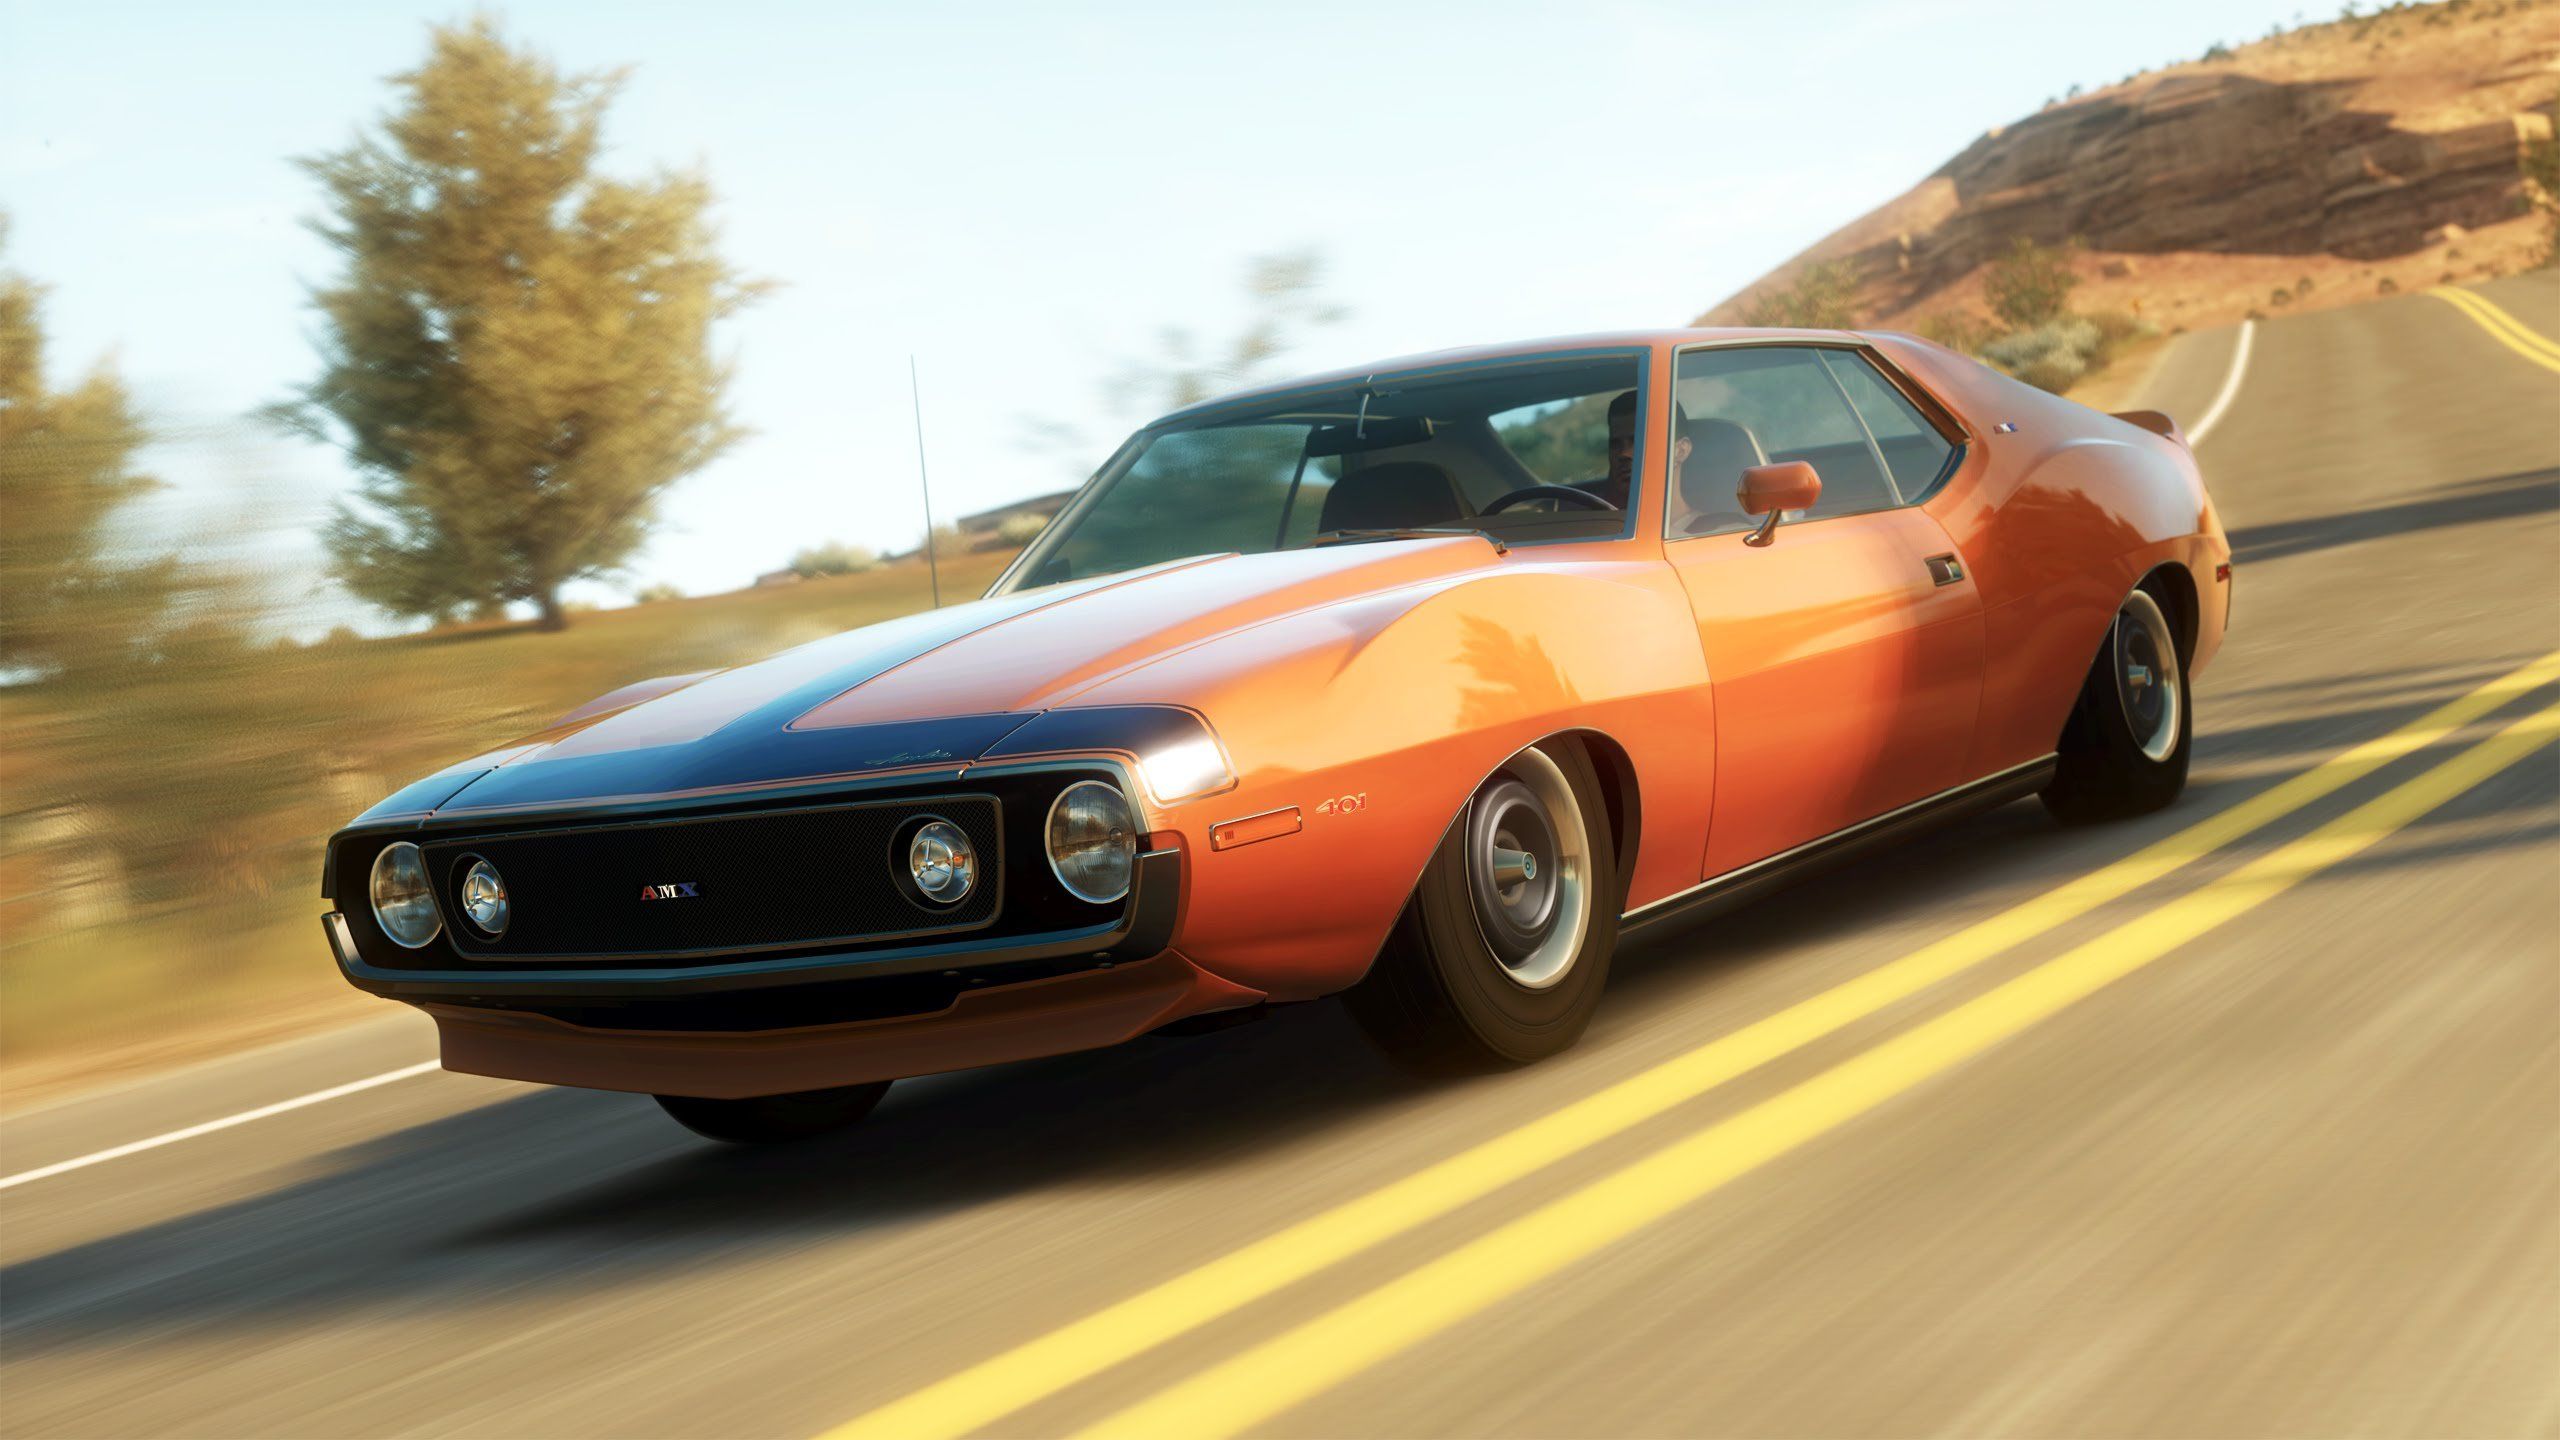 Free download AMC Javelin Wallpapers and Backgrounds Image stmednet 2560x14...